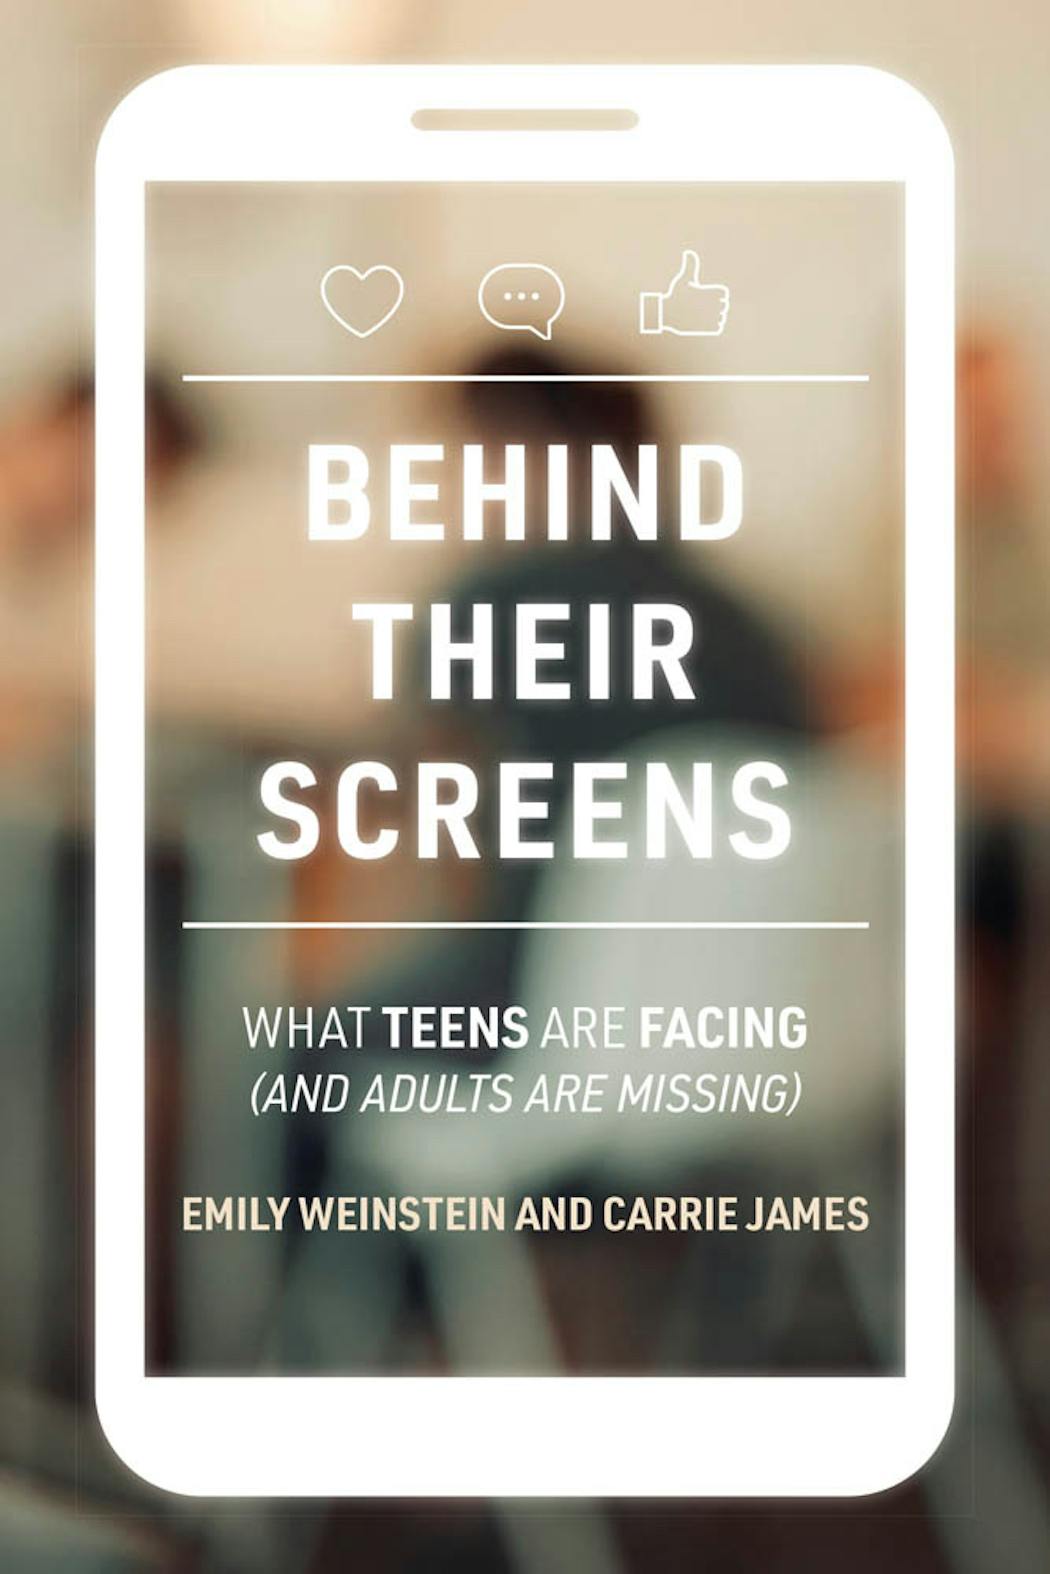 “Behind Their Screens: What Teens Are Facing (And Adults Are Missing)”